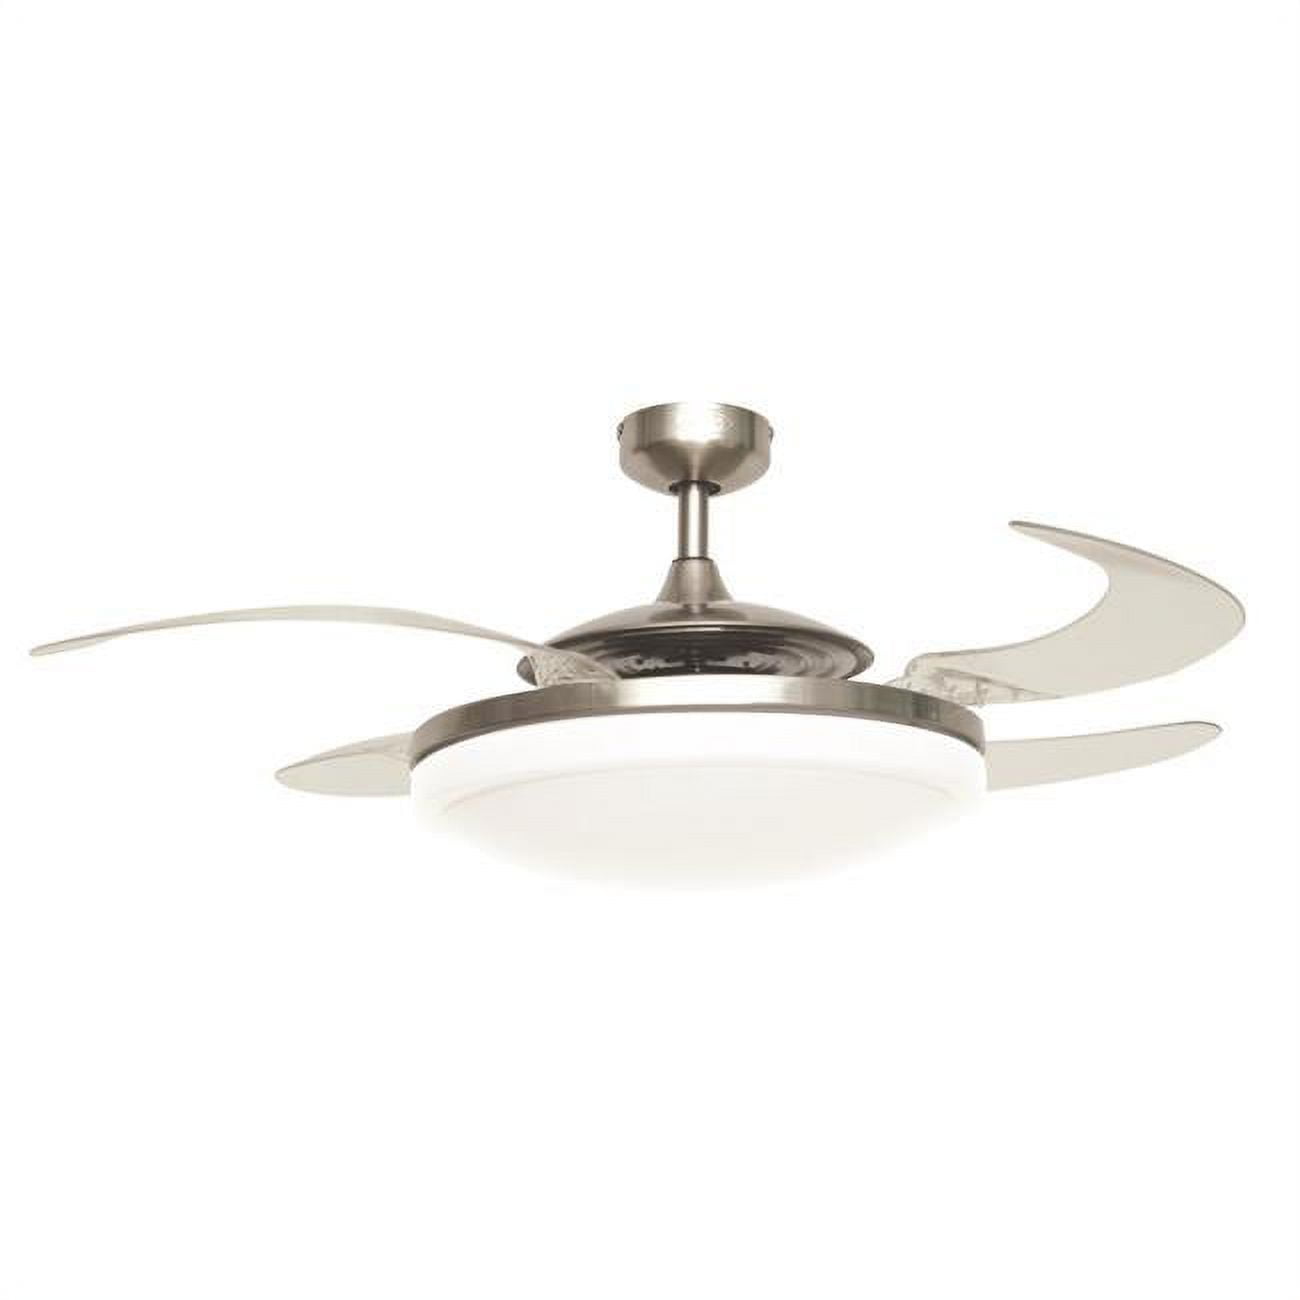 Picture of Fanaway 21093101 EVO 2 Brushed Chrome Lighting with Remote Ceiling Fan